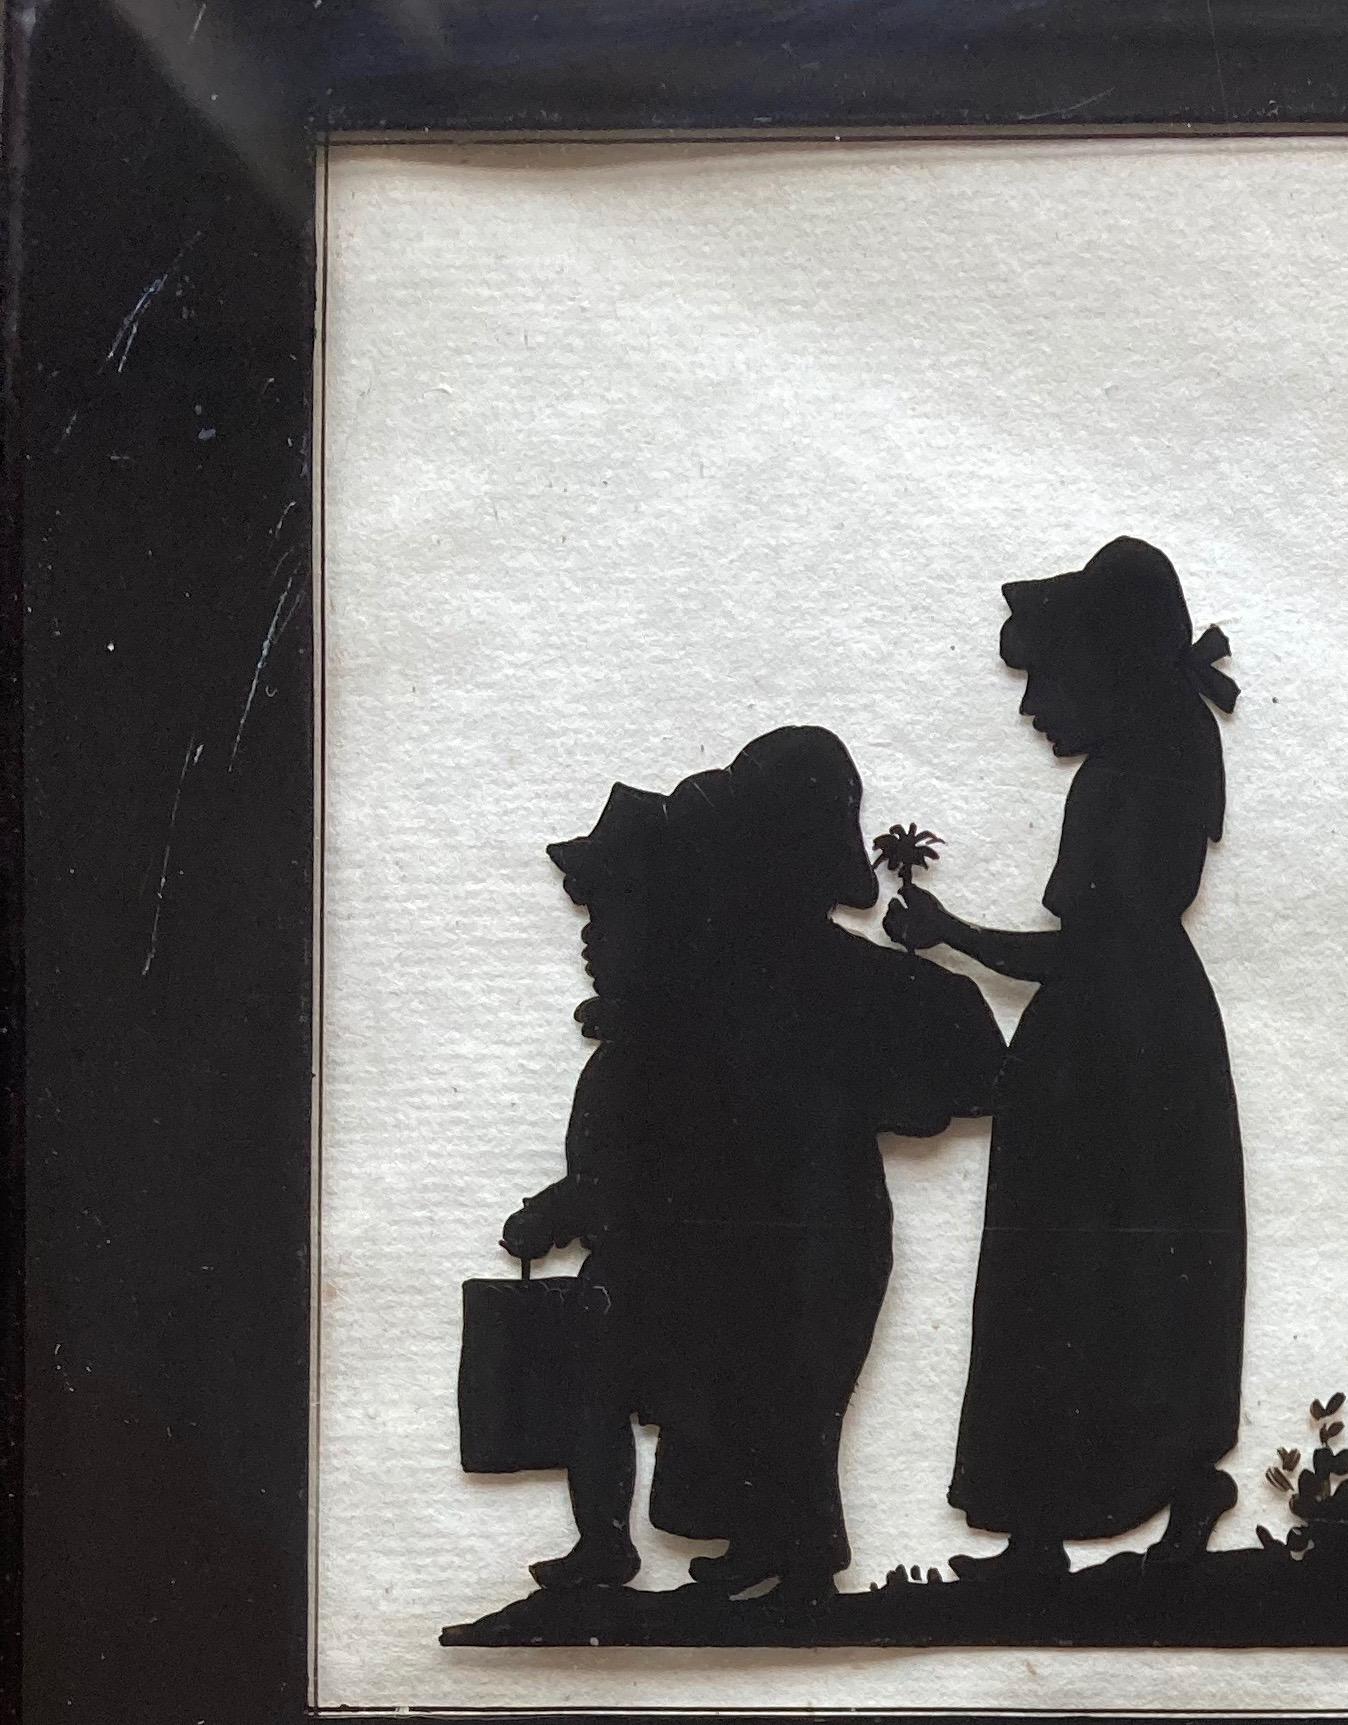 A charming silhouette of a group of children ambling along. So much character is expressed through the minimal monochrome depiction.

English or American School, 19th Century
A silhouette of children ambling along, perhaps to school
Reverse painted